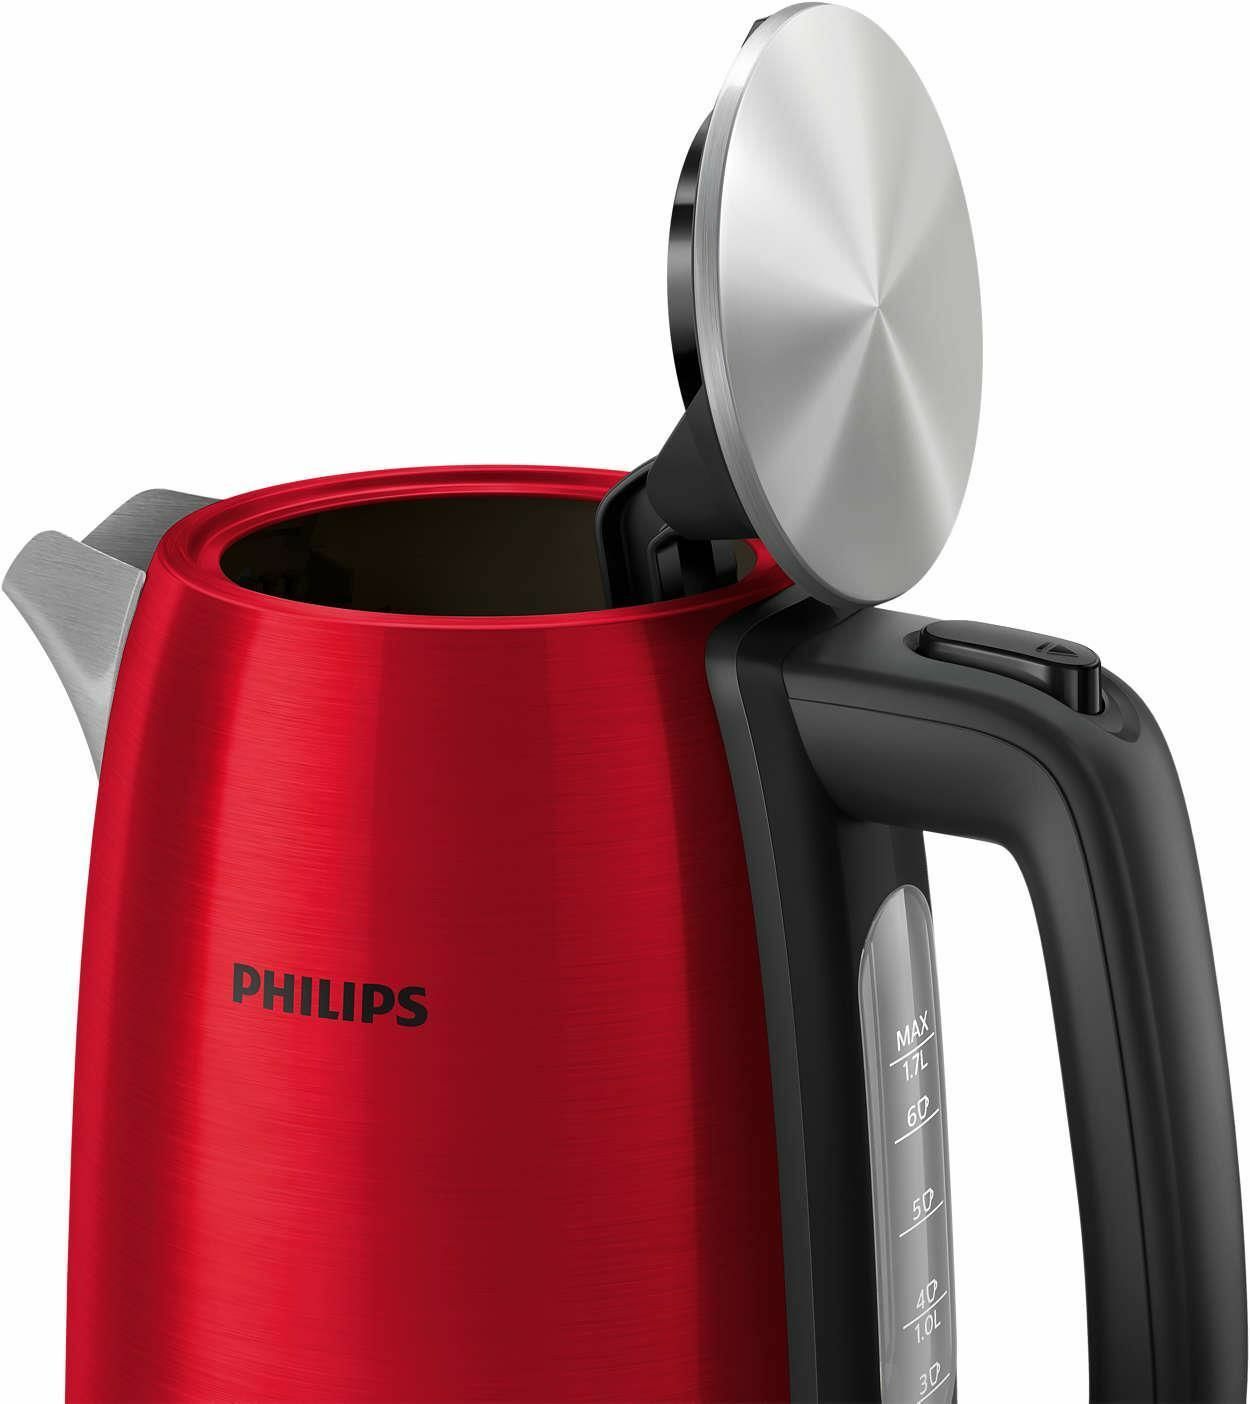 Philips HD9352/60 / Red